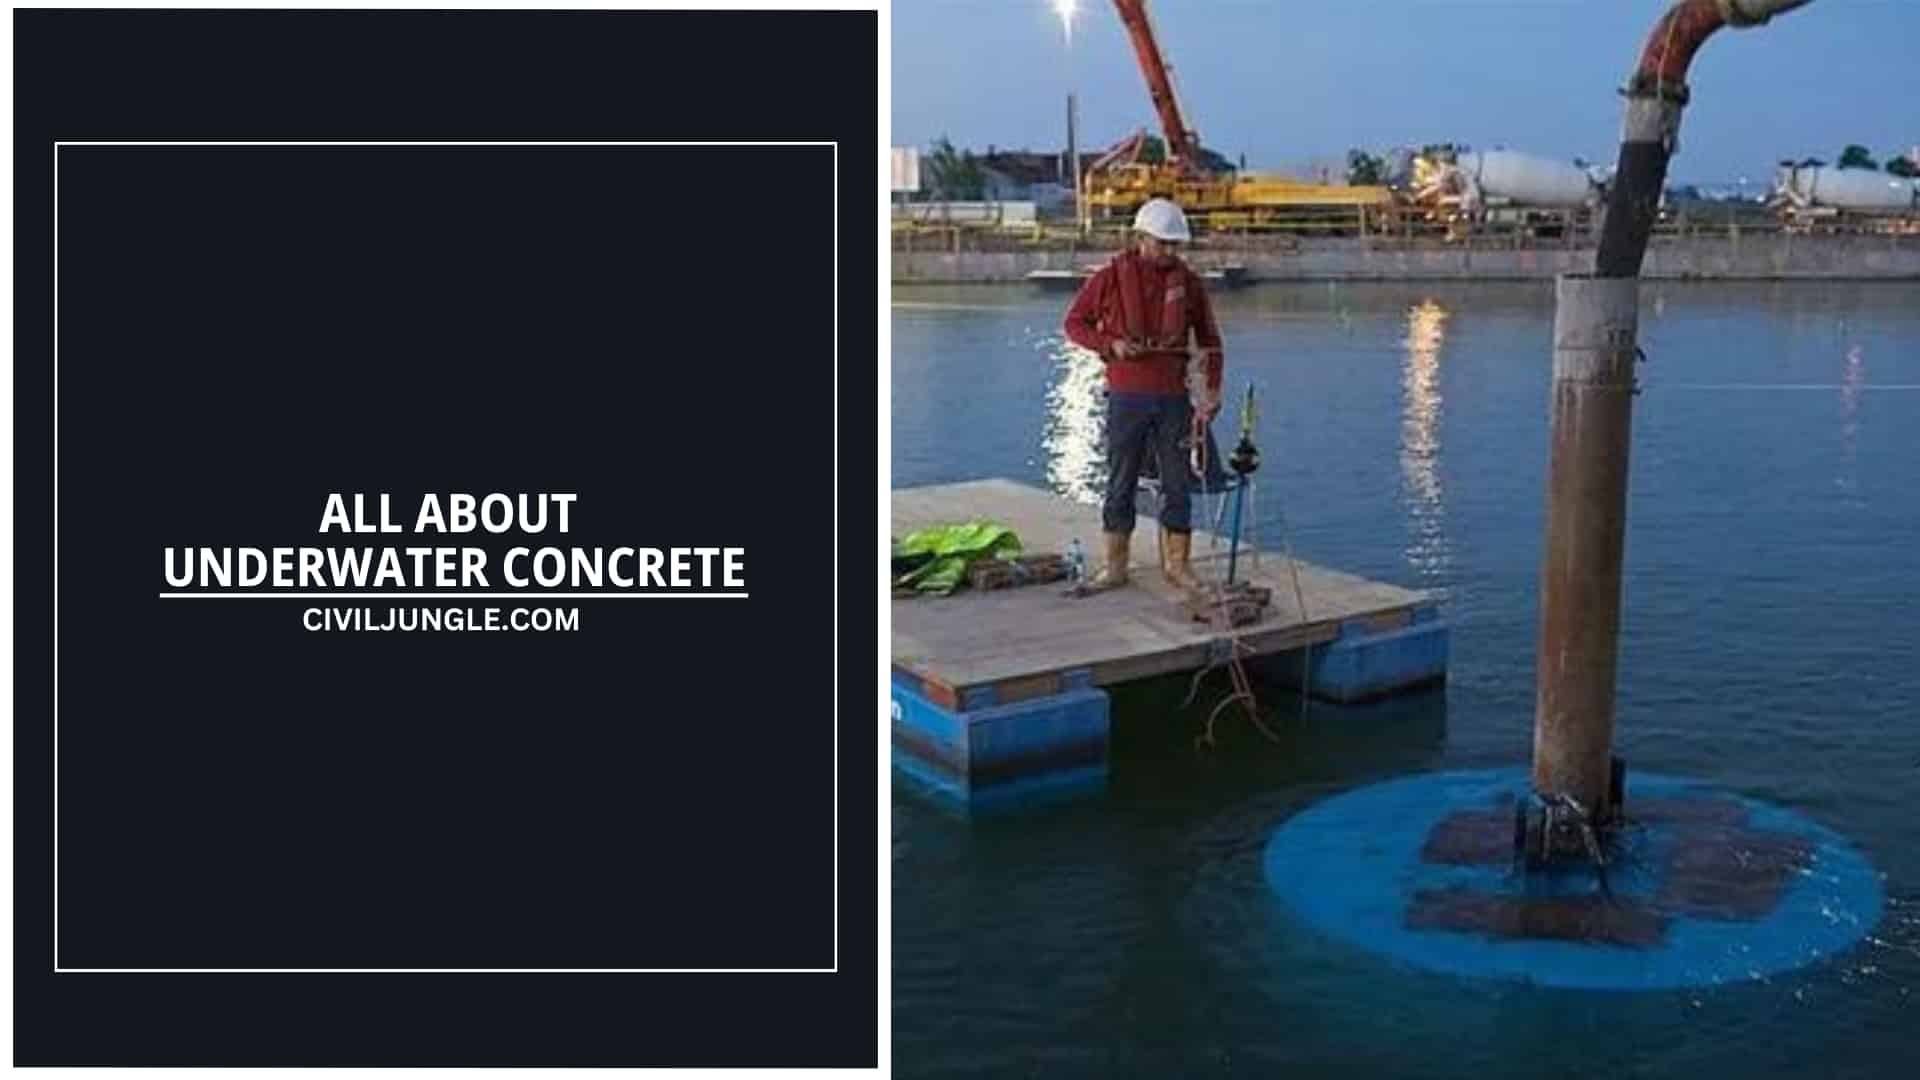 All About Underwater Concrete